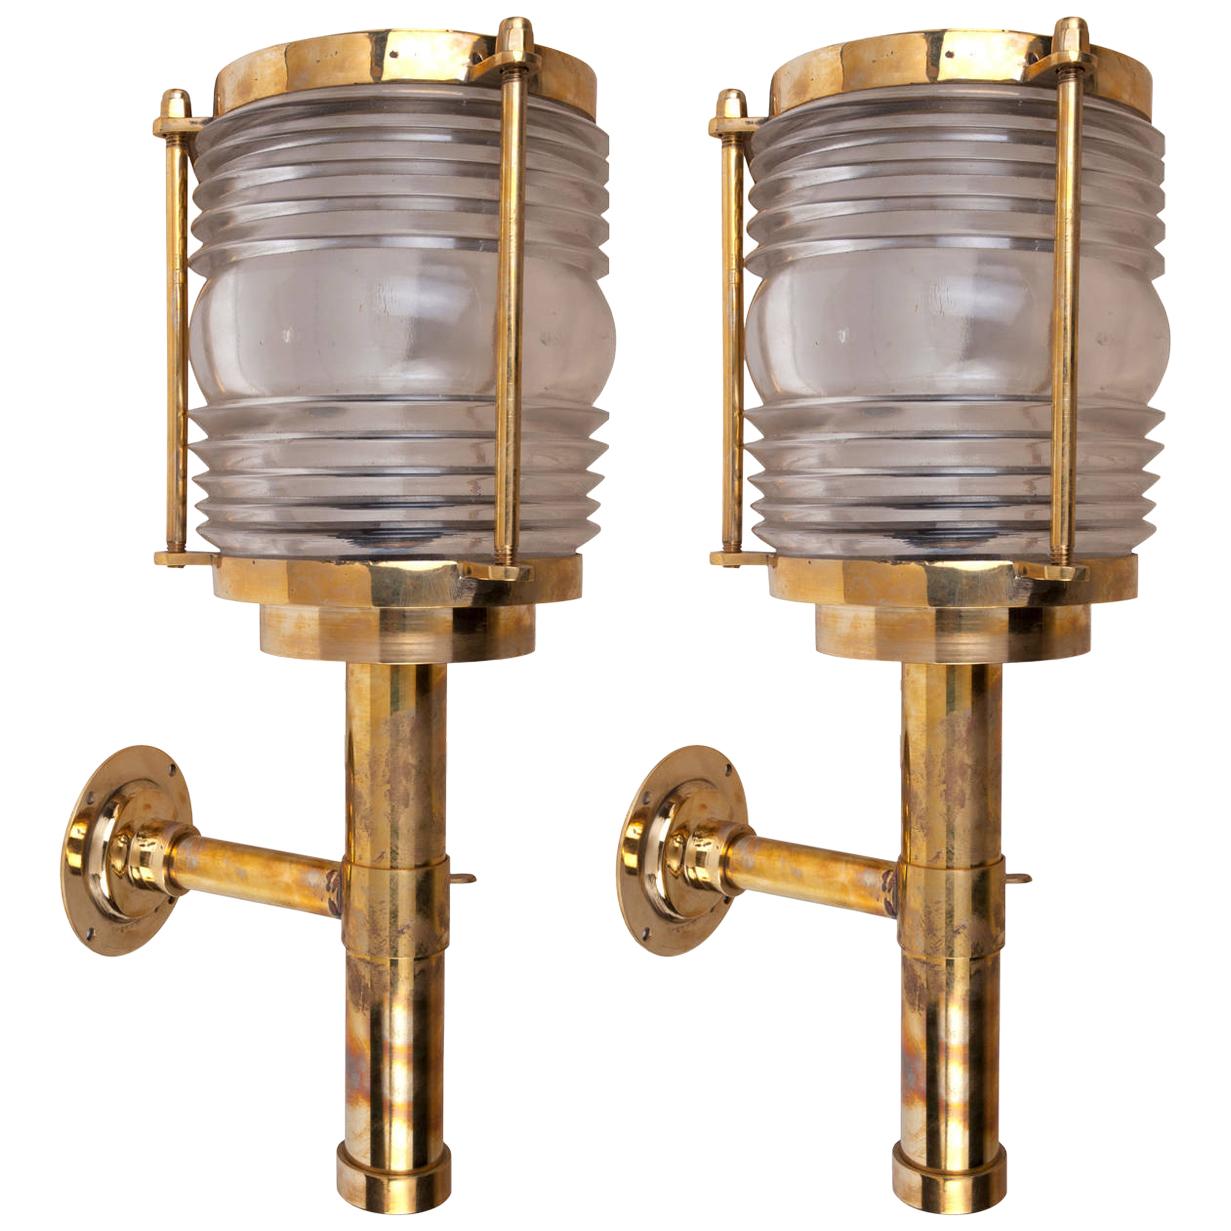 Pair of Ship's Brass Passageway Lights with Fresnel Lens, Midcentury